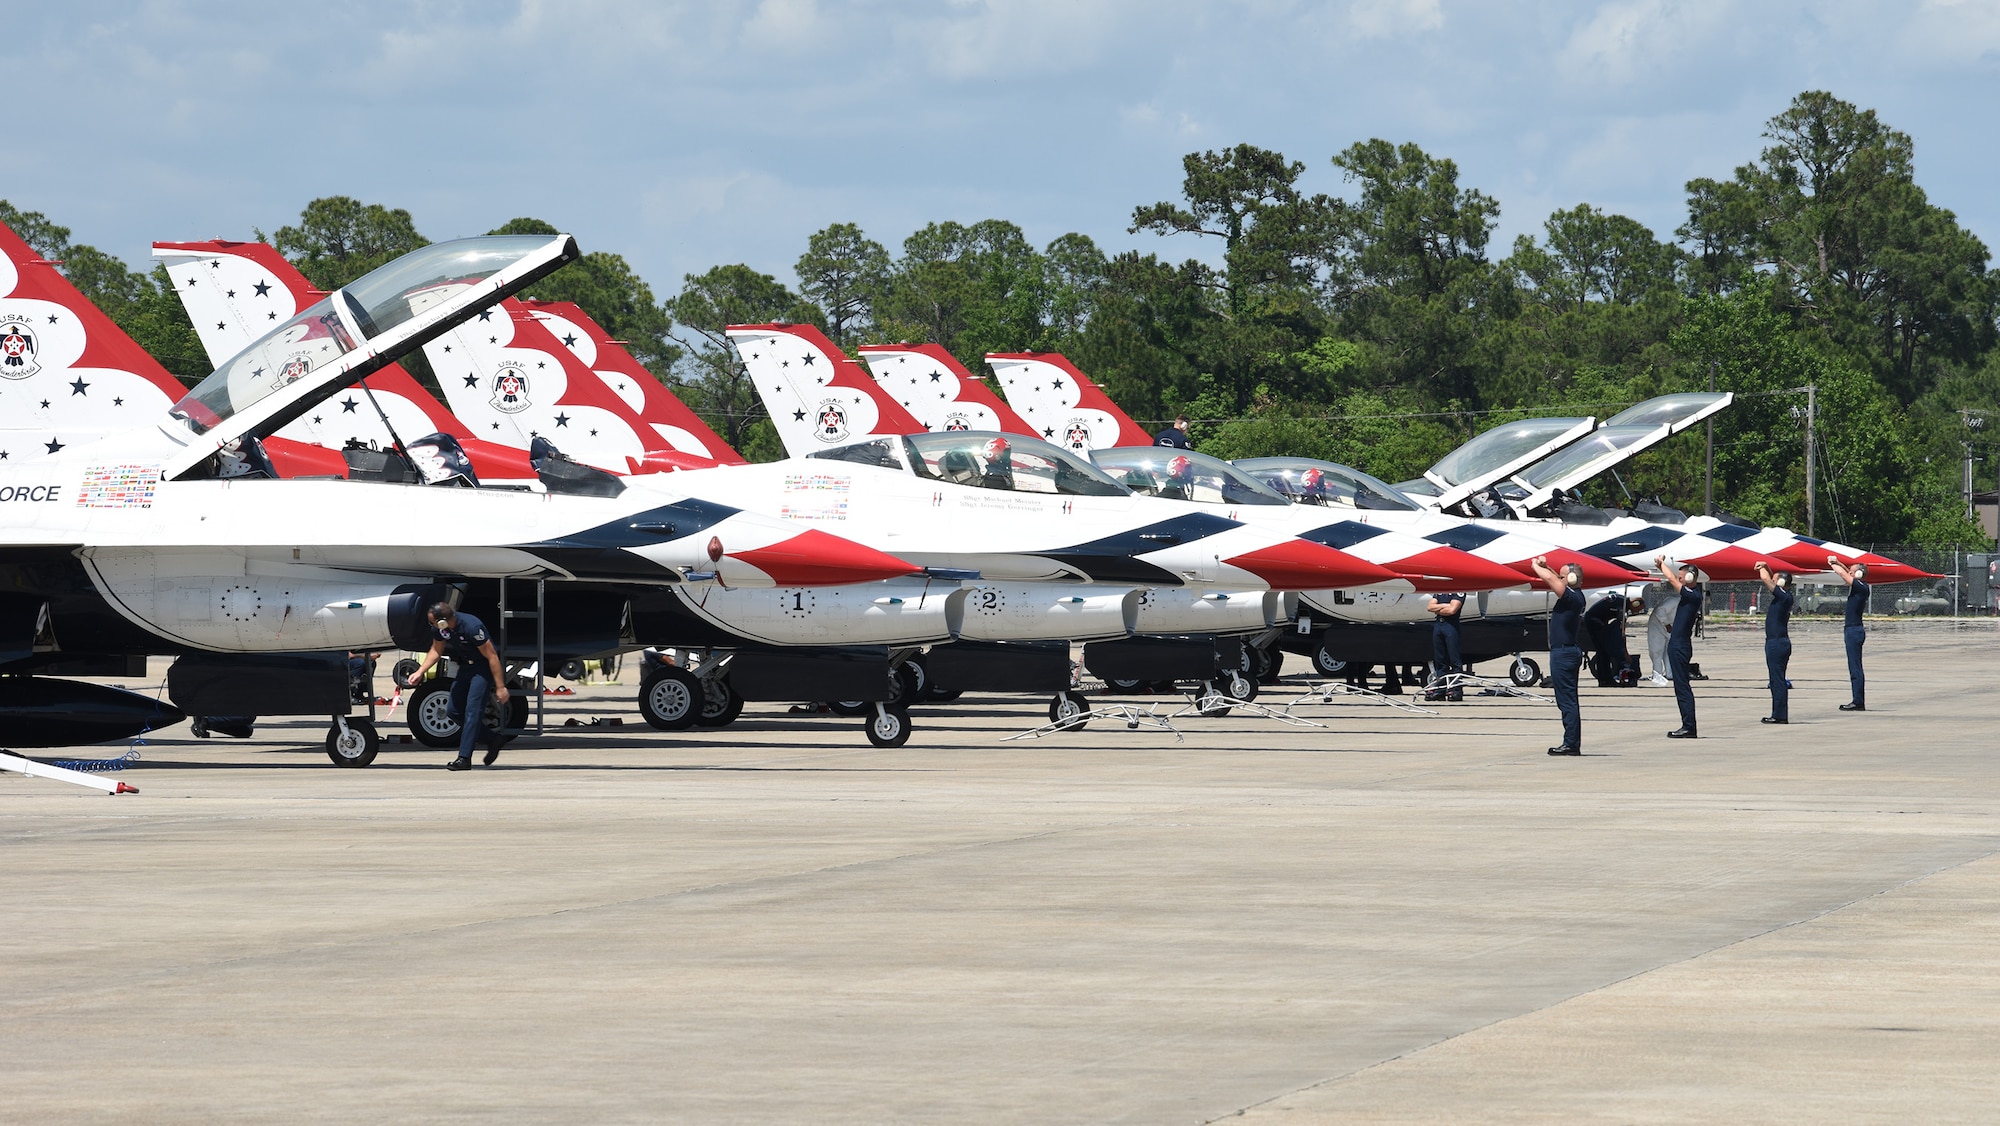 The Air Force Thunderbirds arrive at the Combat Readiness Training Center in Gulfport, Mississippi, May 2, 2019.